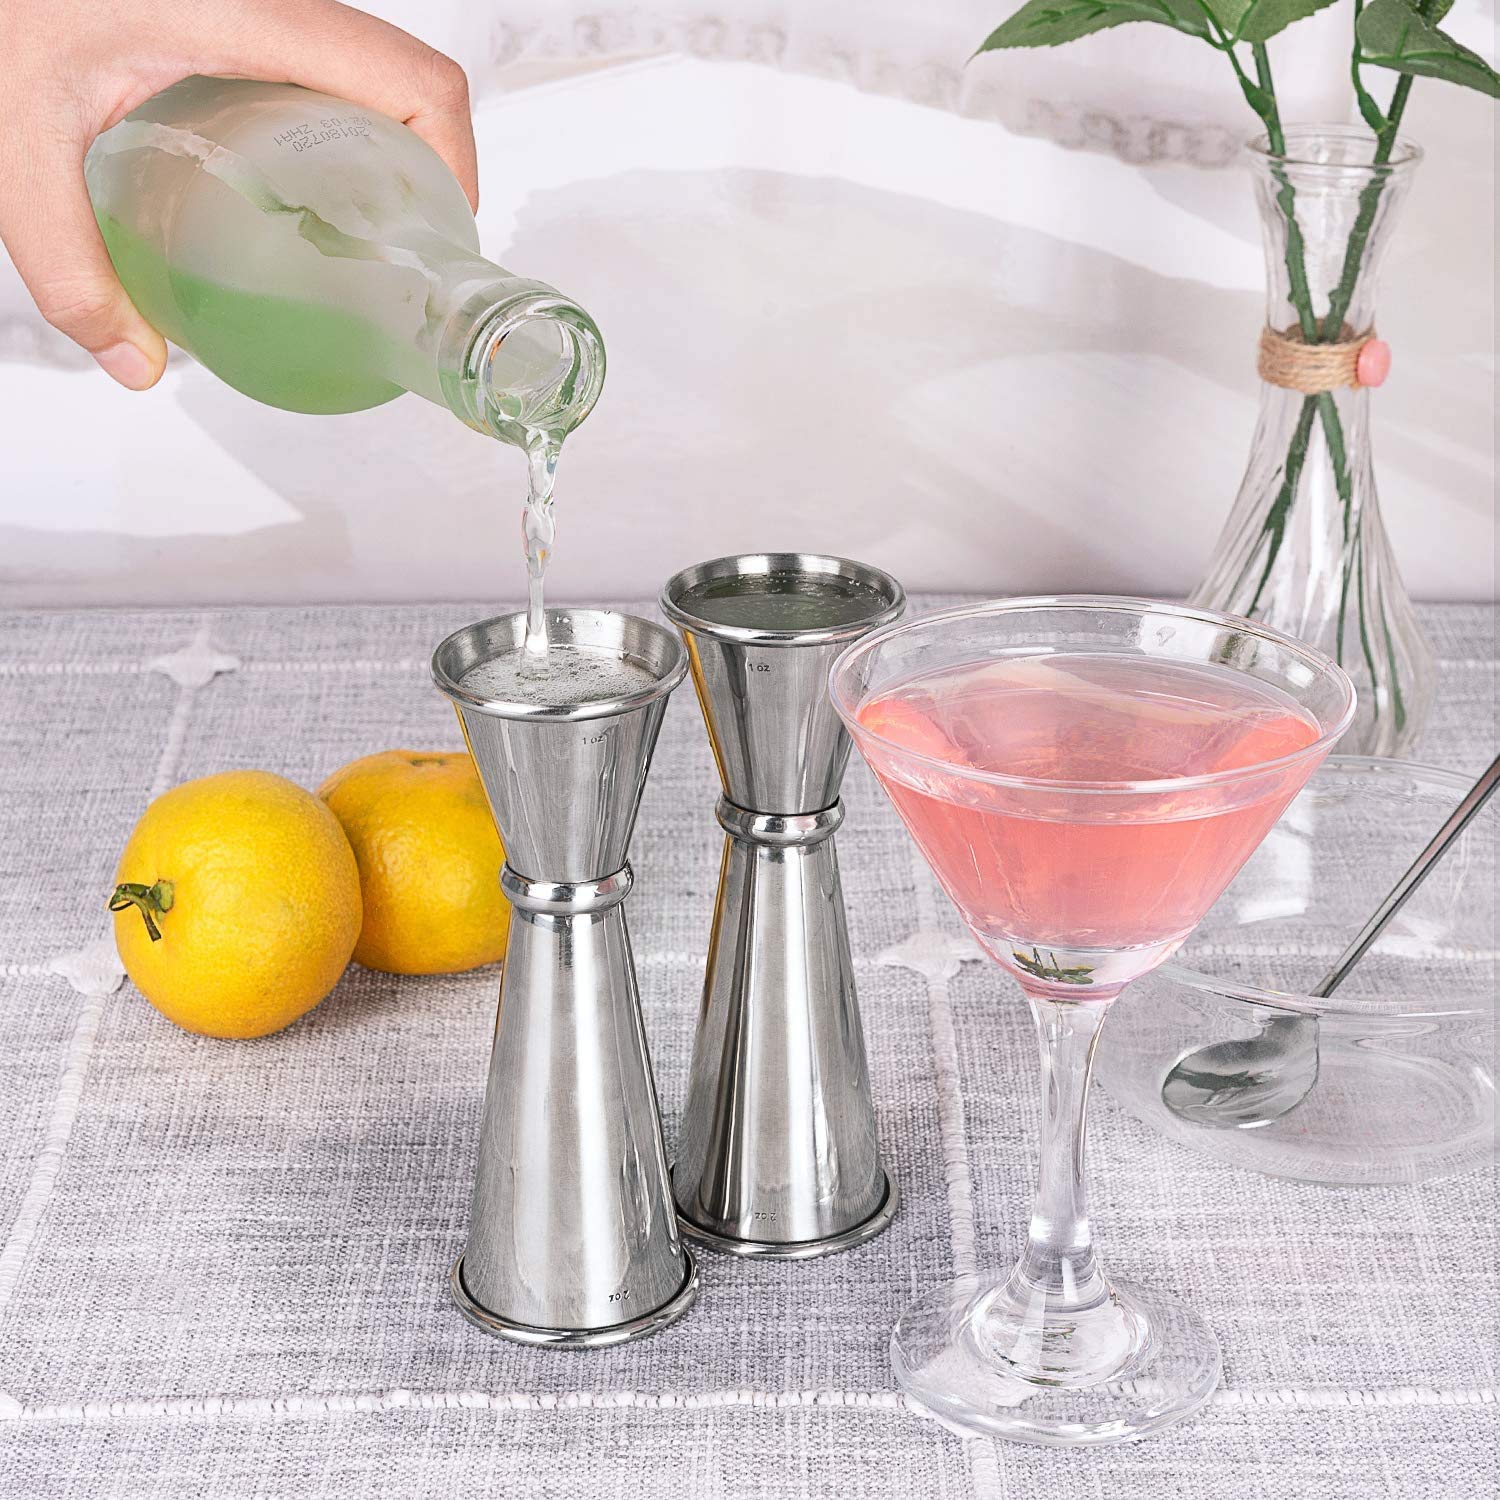 NJ Cocktail Tools, Bartender Kit, 2 Pcs Double Japanese Peg Measurer (25-50 ml and 30-60 ml) and 1 Pc. Teardrop Mixing Spoon, 1 Cocktail Strainer: 4 PCS